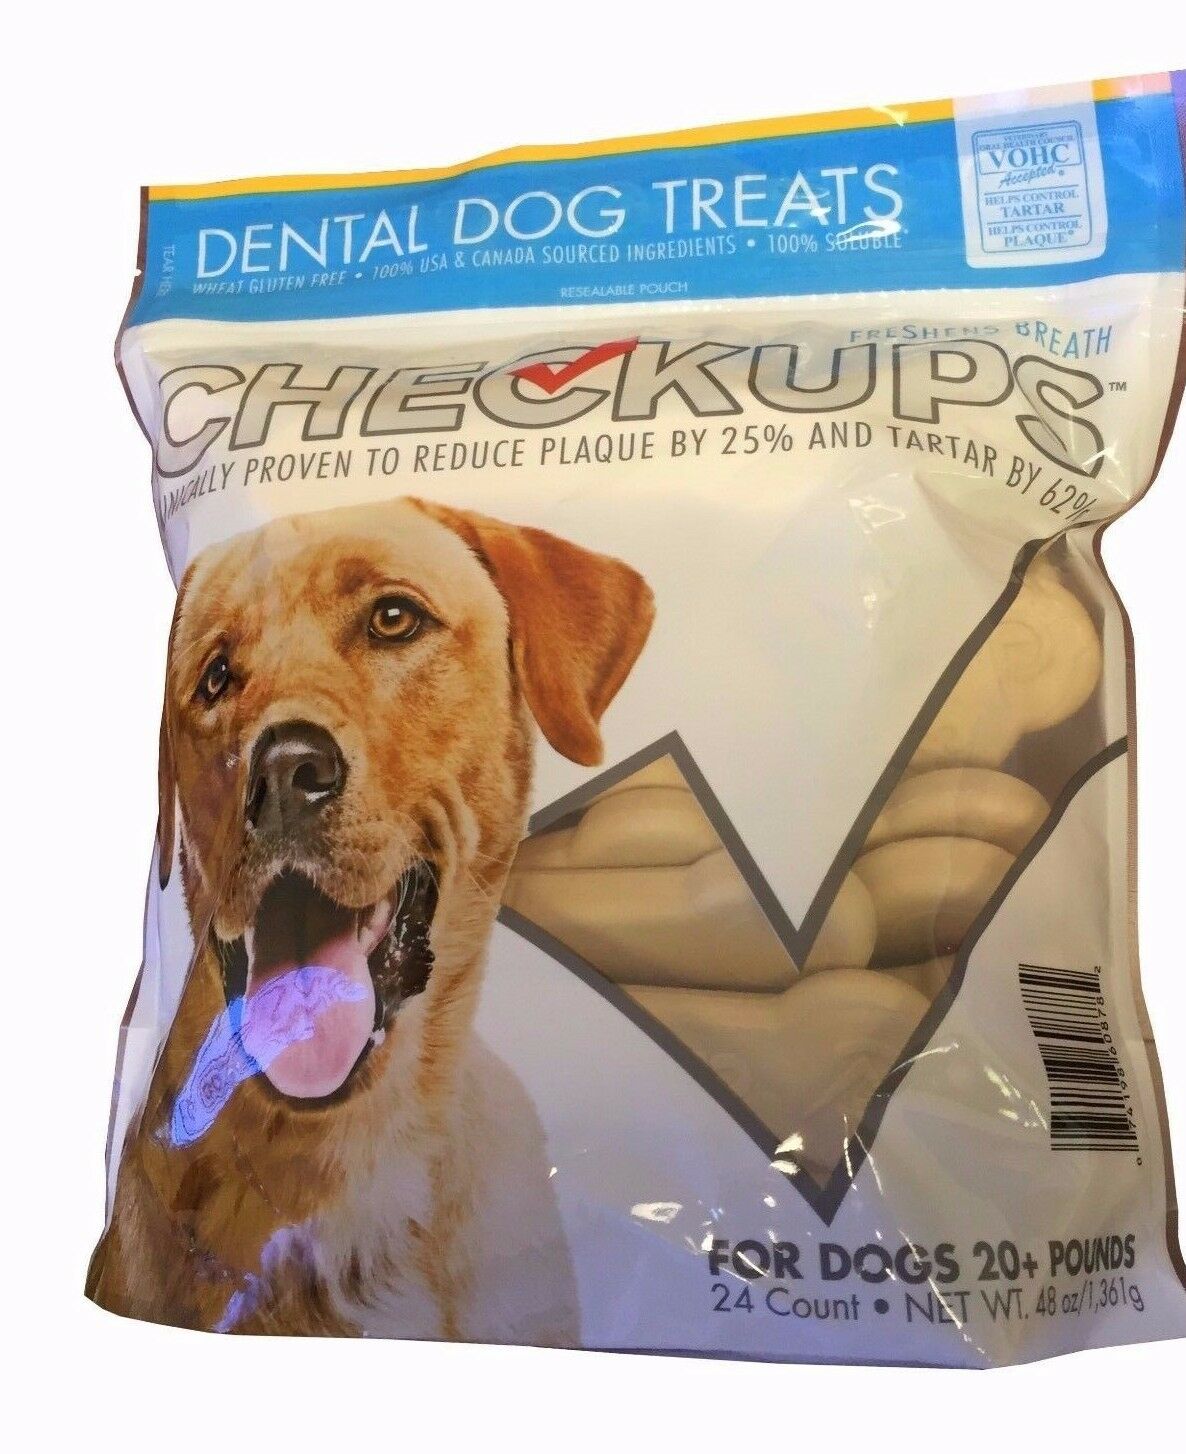 Checkups Dental Dog Treats For Dogs 20+ Lbs Freshens Breath 24 Count Net Wt 3lb